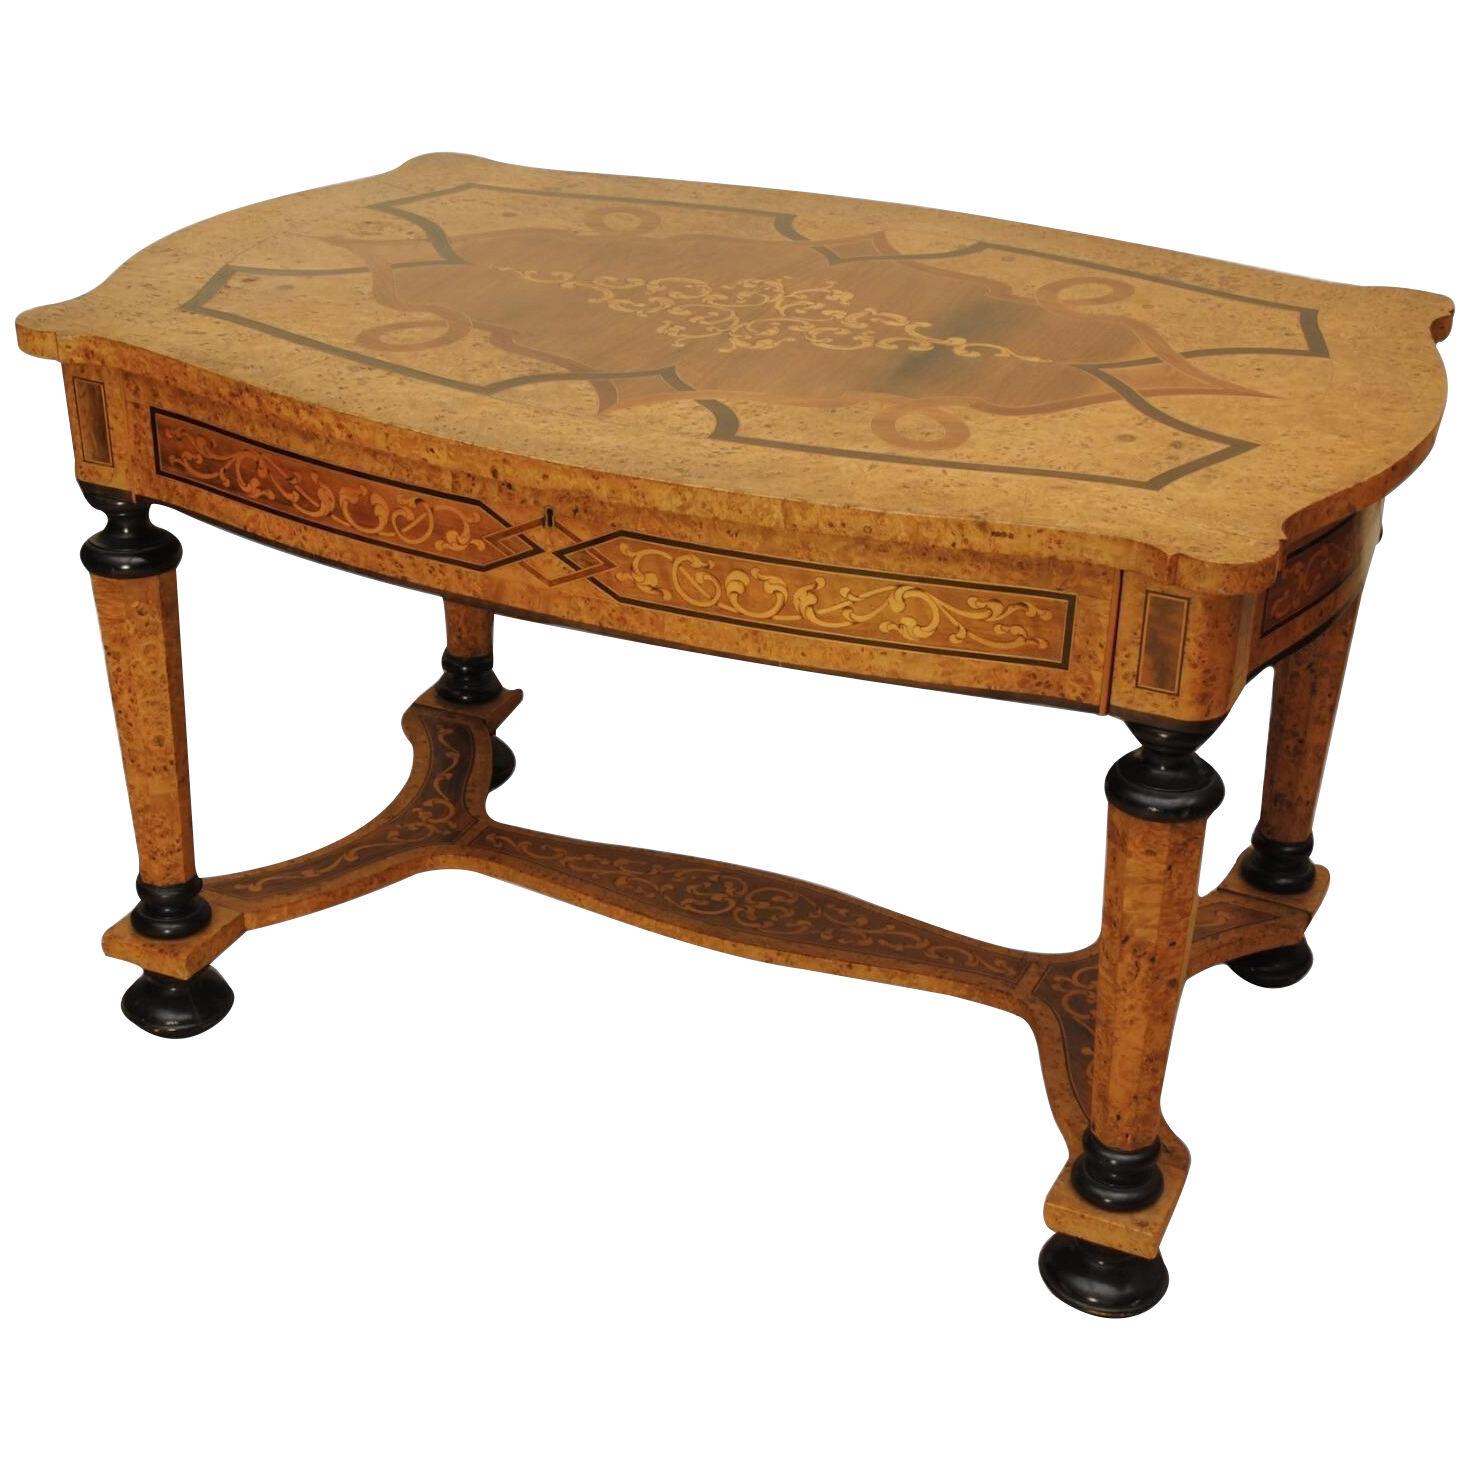 19TH CENTURY GERMAN MARQUETRY CENTRE TABLE